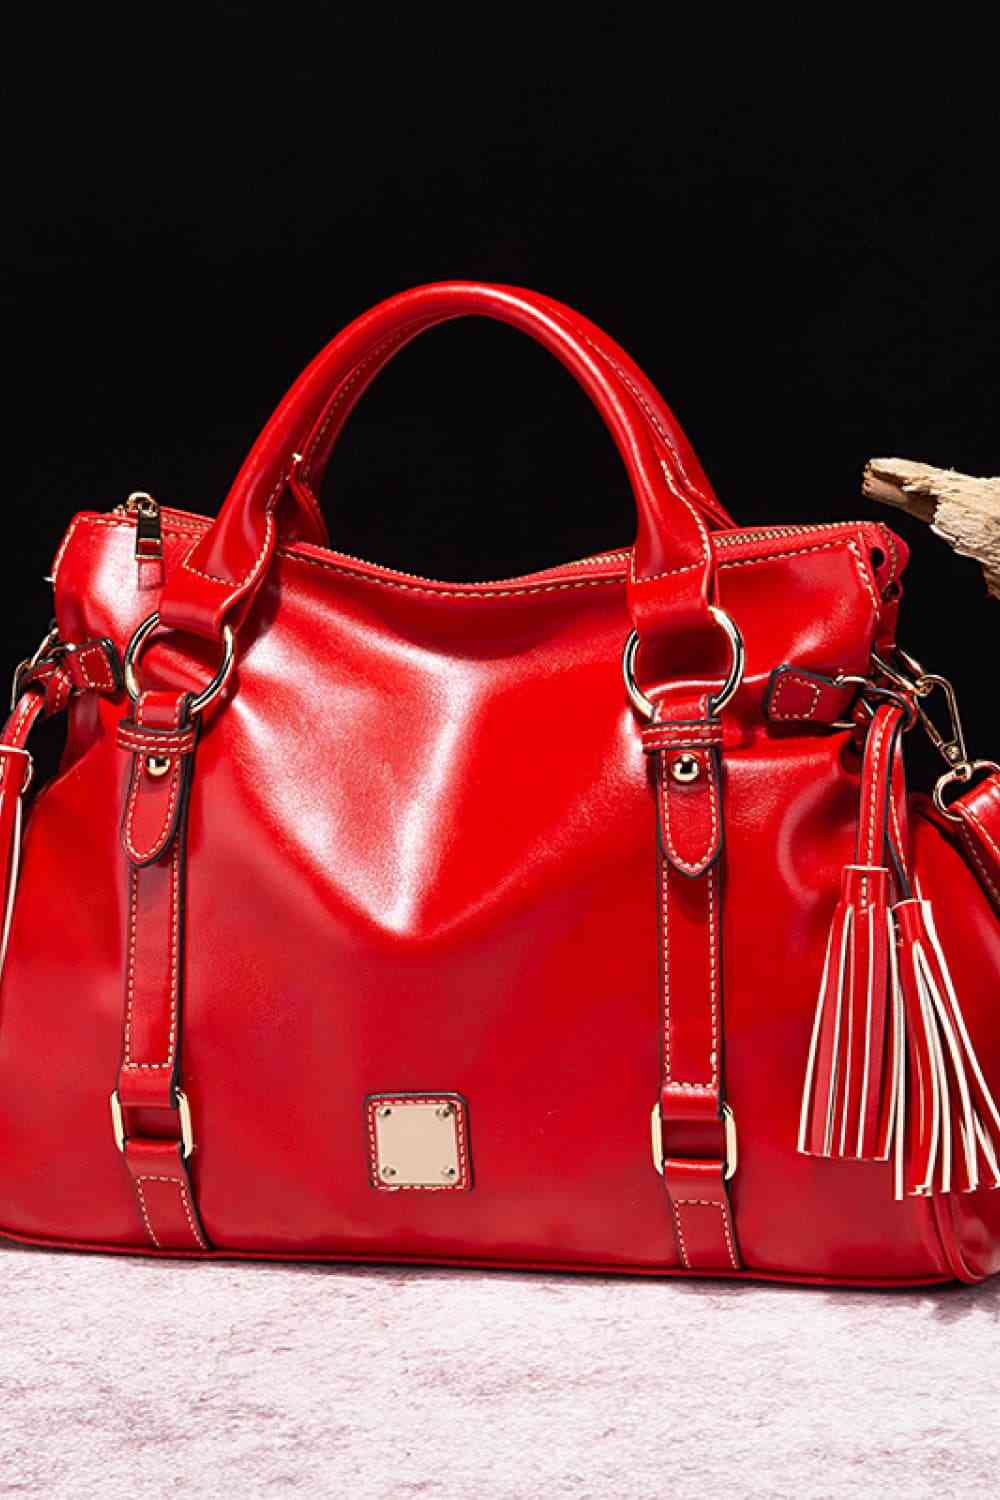 Vegan Leather Handbag with Tassels Red / One Size